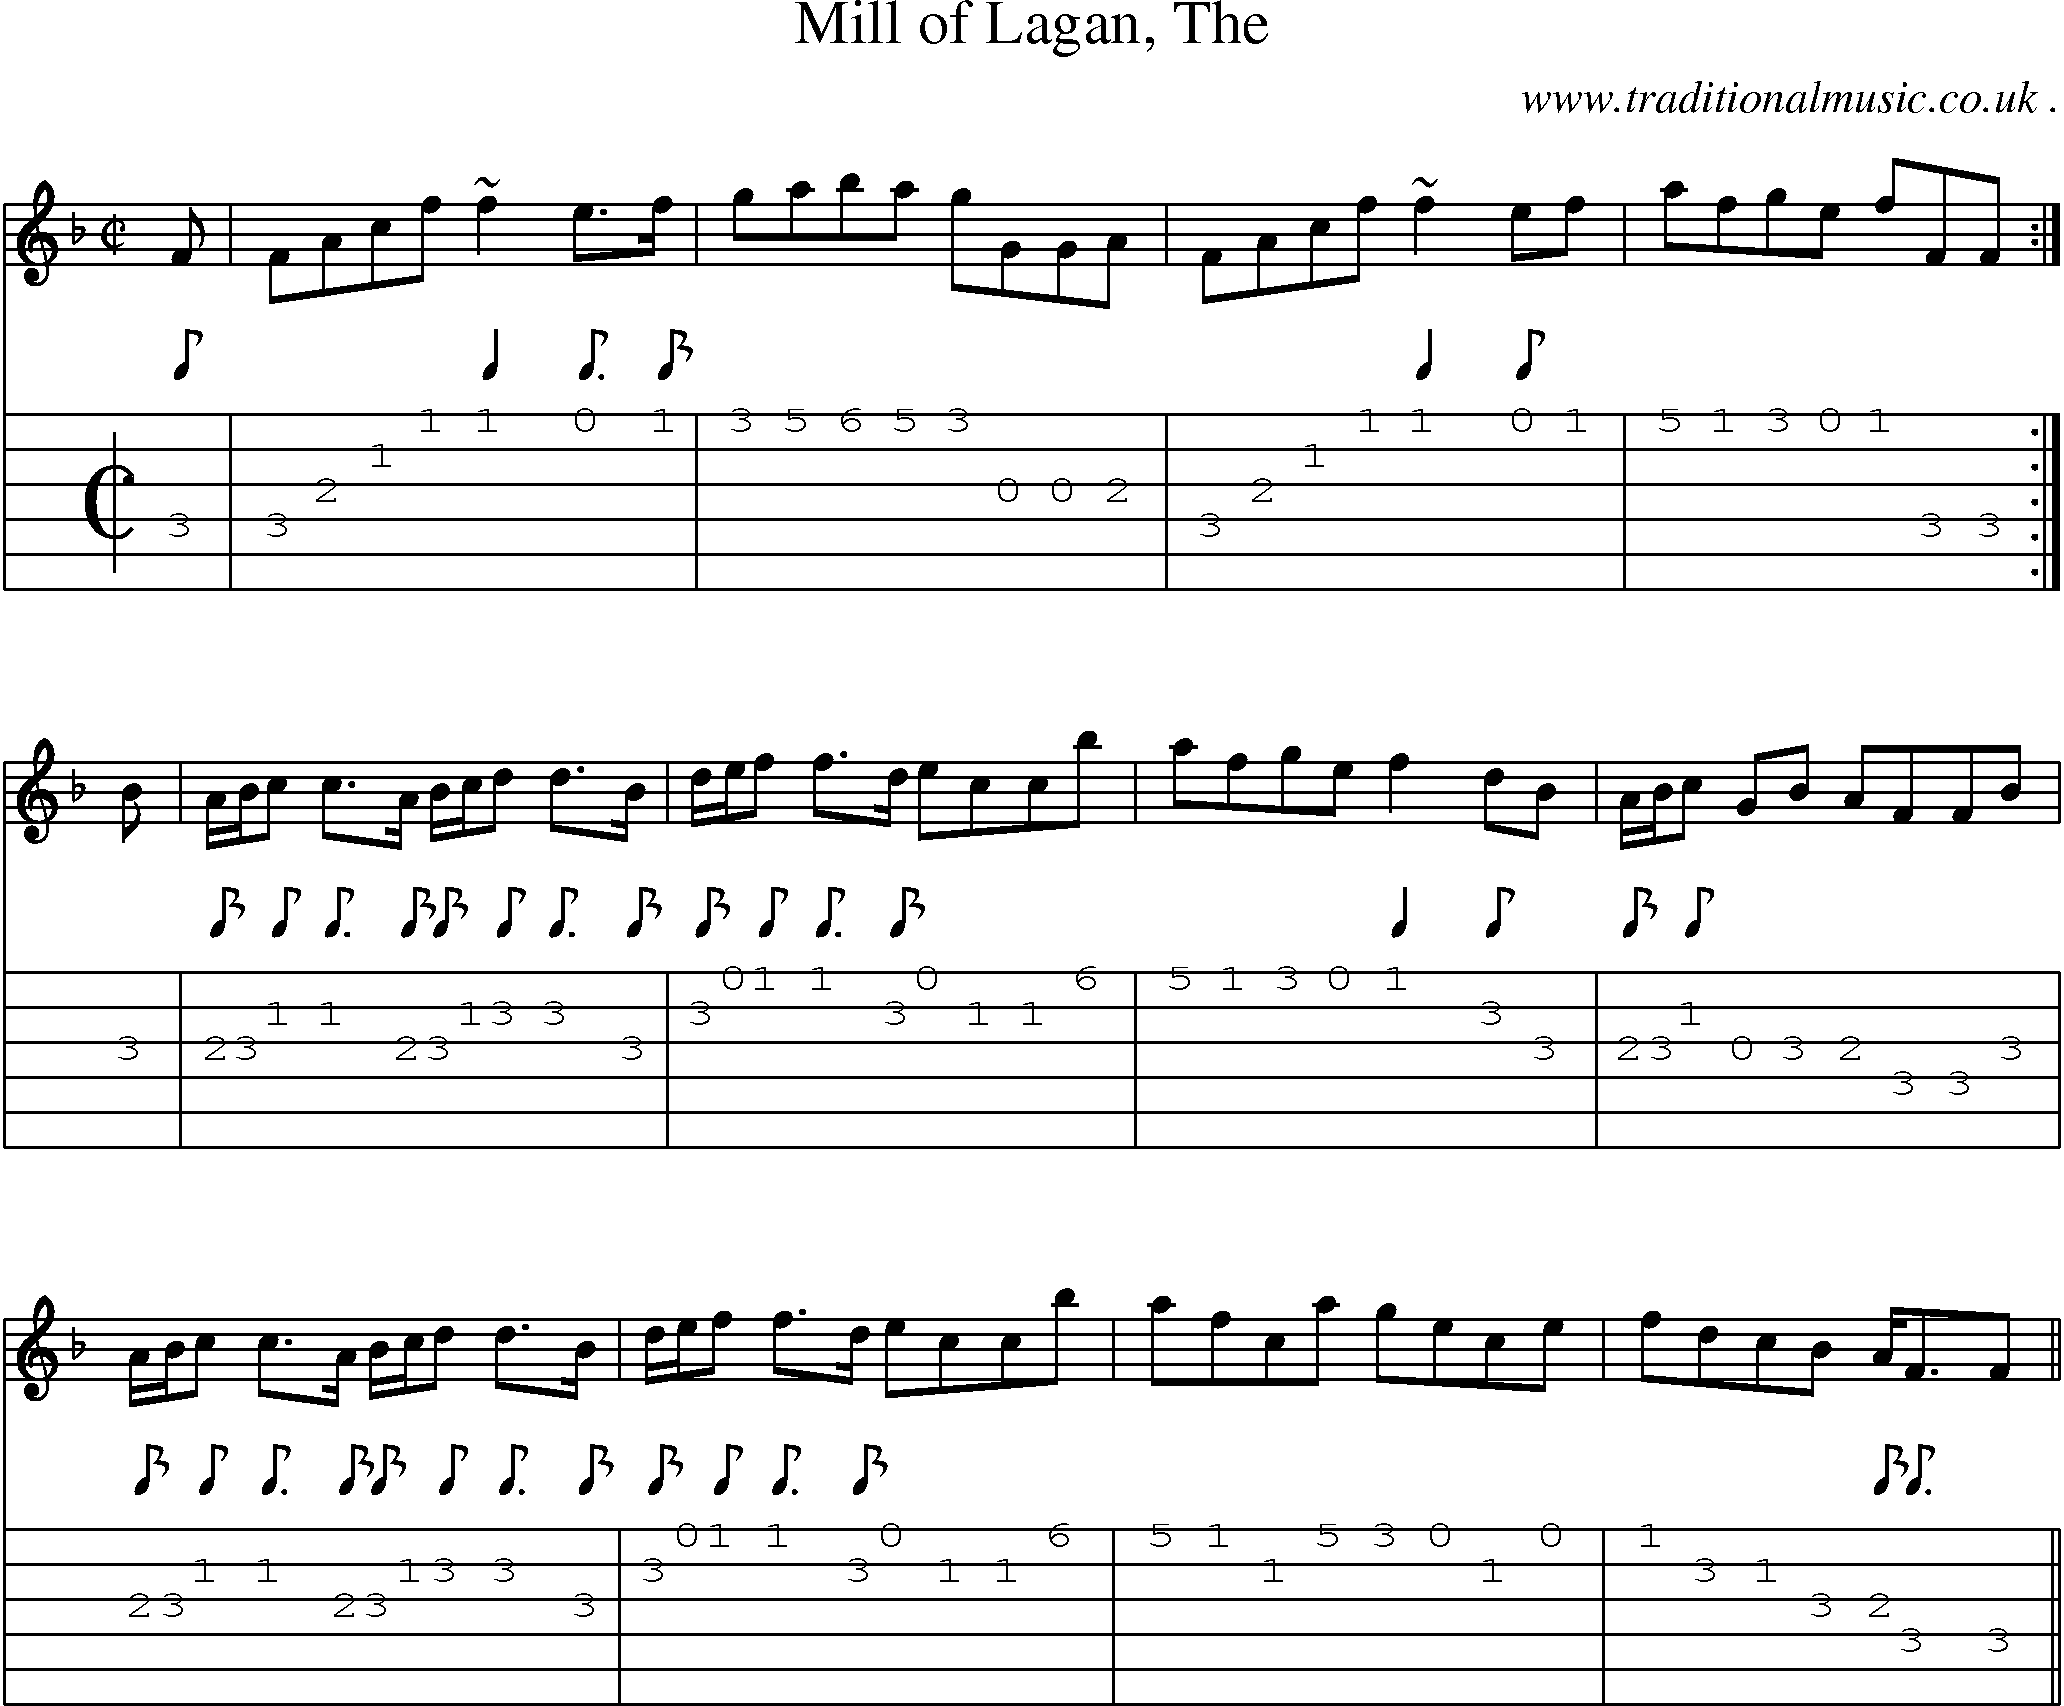 Sheet-music  score, Chords and Guitar Tabs for Mill Of Lagan The